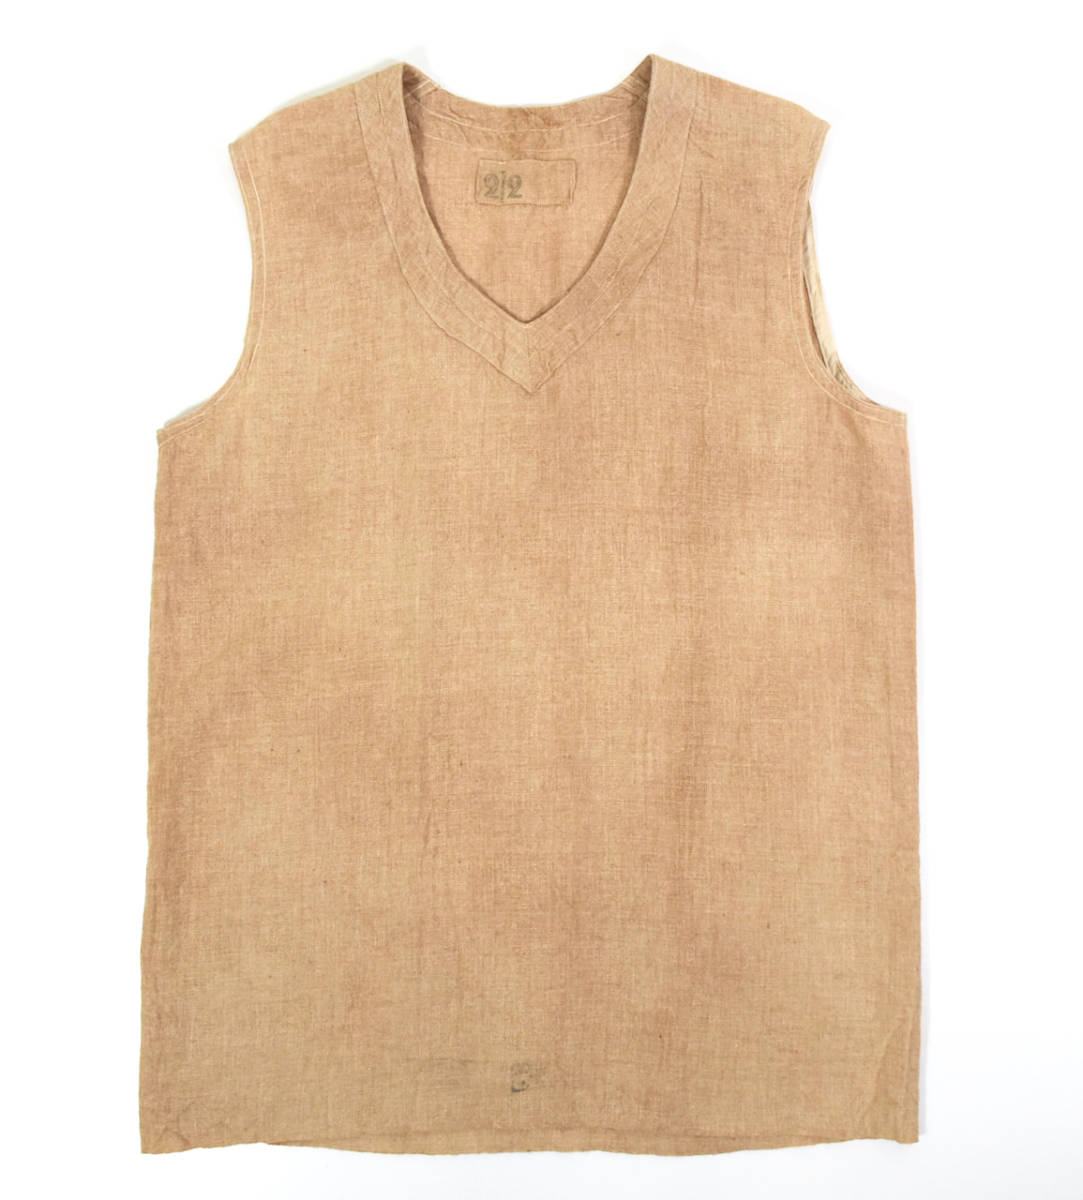 1950s French military vest M～L Beige ヴィンテージベスト 麻 ミリタリー フランス軍